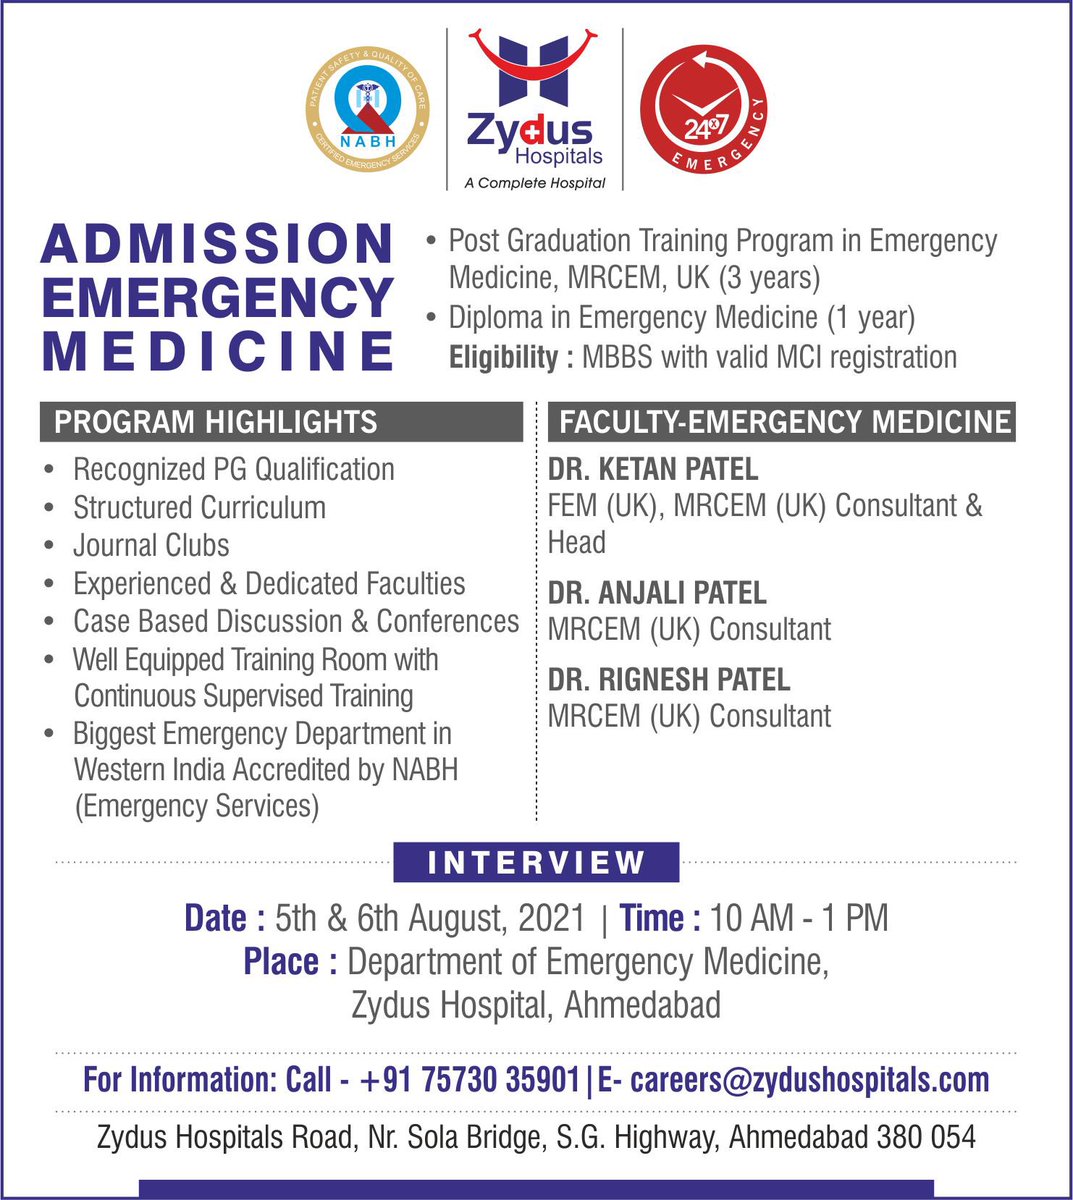 Zydus Hospitals invites applications for interviews for admission in MRCEM, Emergency Medicine. 
With Expert Faculty of Emergency Medicine, we are looking for compassionate students.

#ZydusHospitals #Admission #MedicalCourse #EmergencyMedicine #Interview #Freshers #MBBS #MRCEM https://t.co/p4TQjwf6yQ